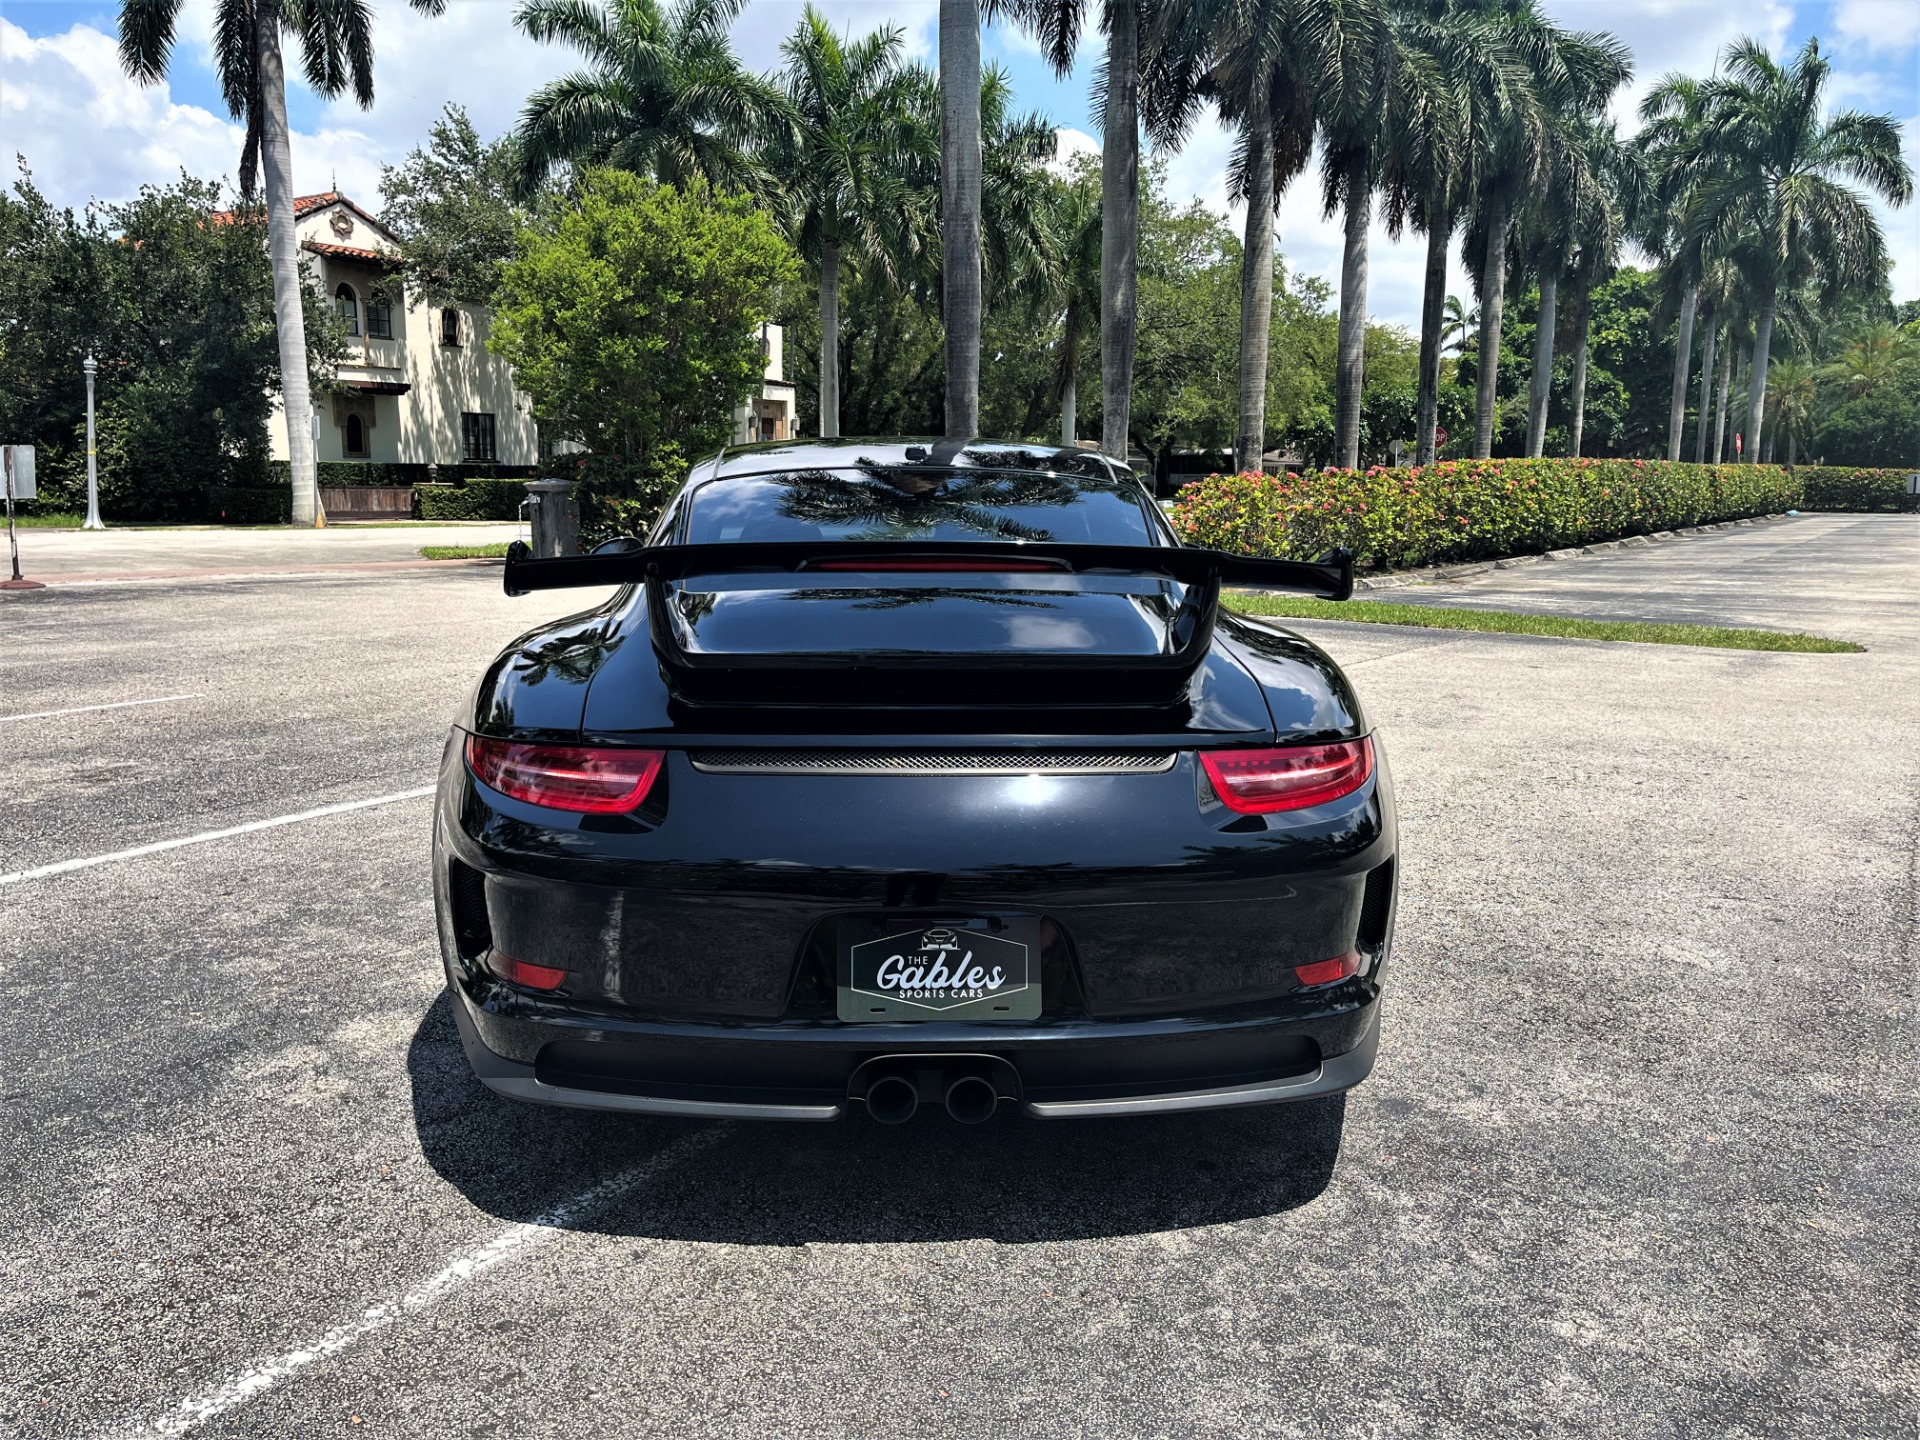 Used 2015 Porsche 911 GT3 for sale $135,850 at The Gables Sports Cars in Miami FL 33146 4